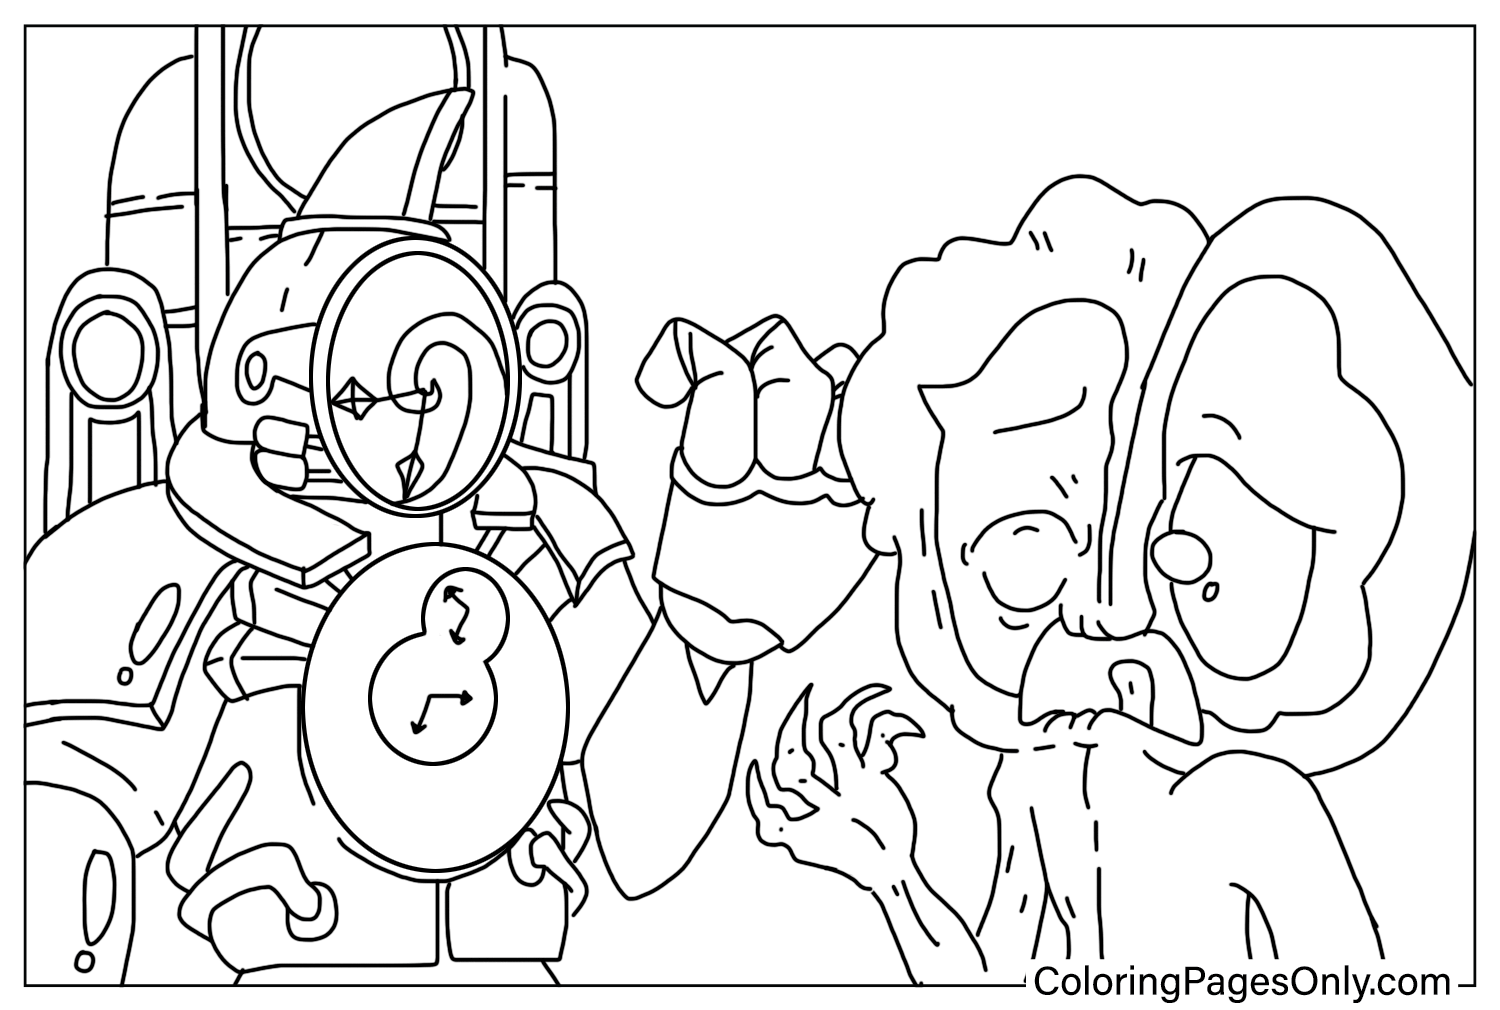 Titan ClockMan and Bittergiggle Coloring Page from Titan Clock Man